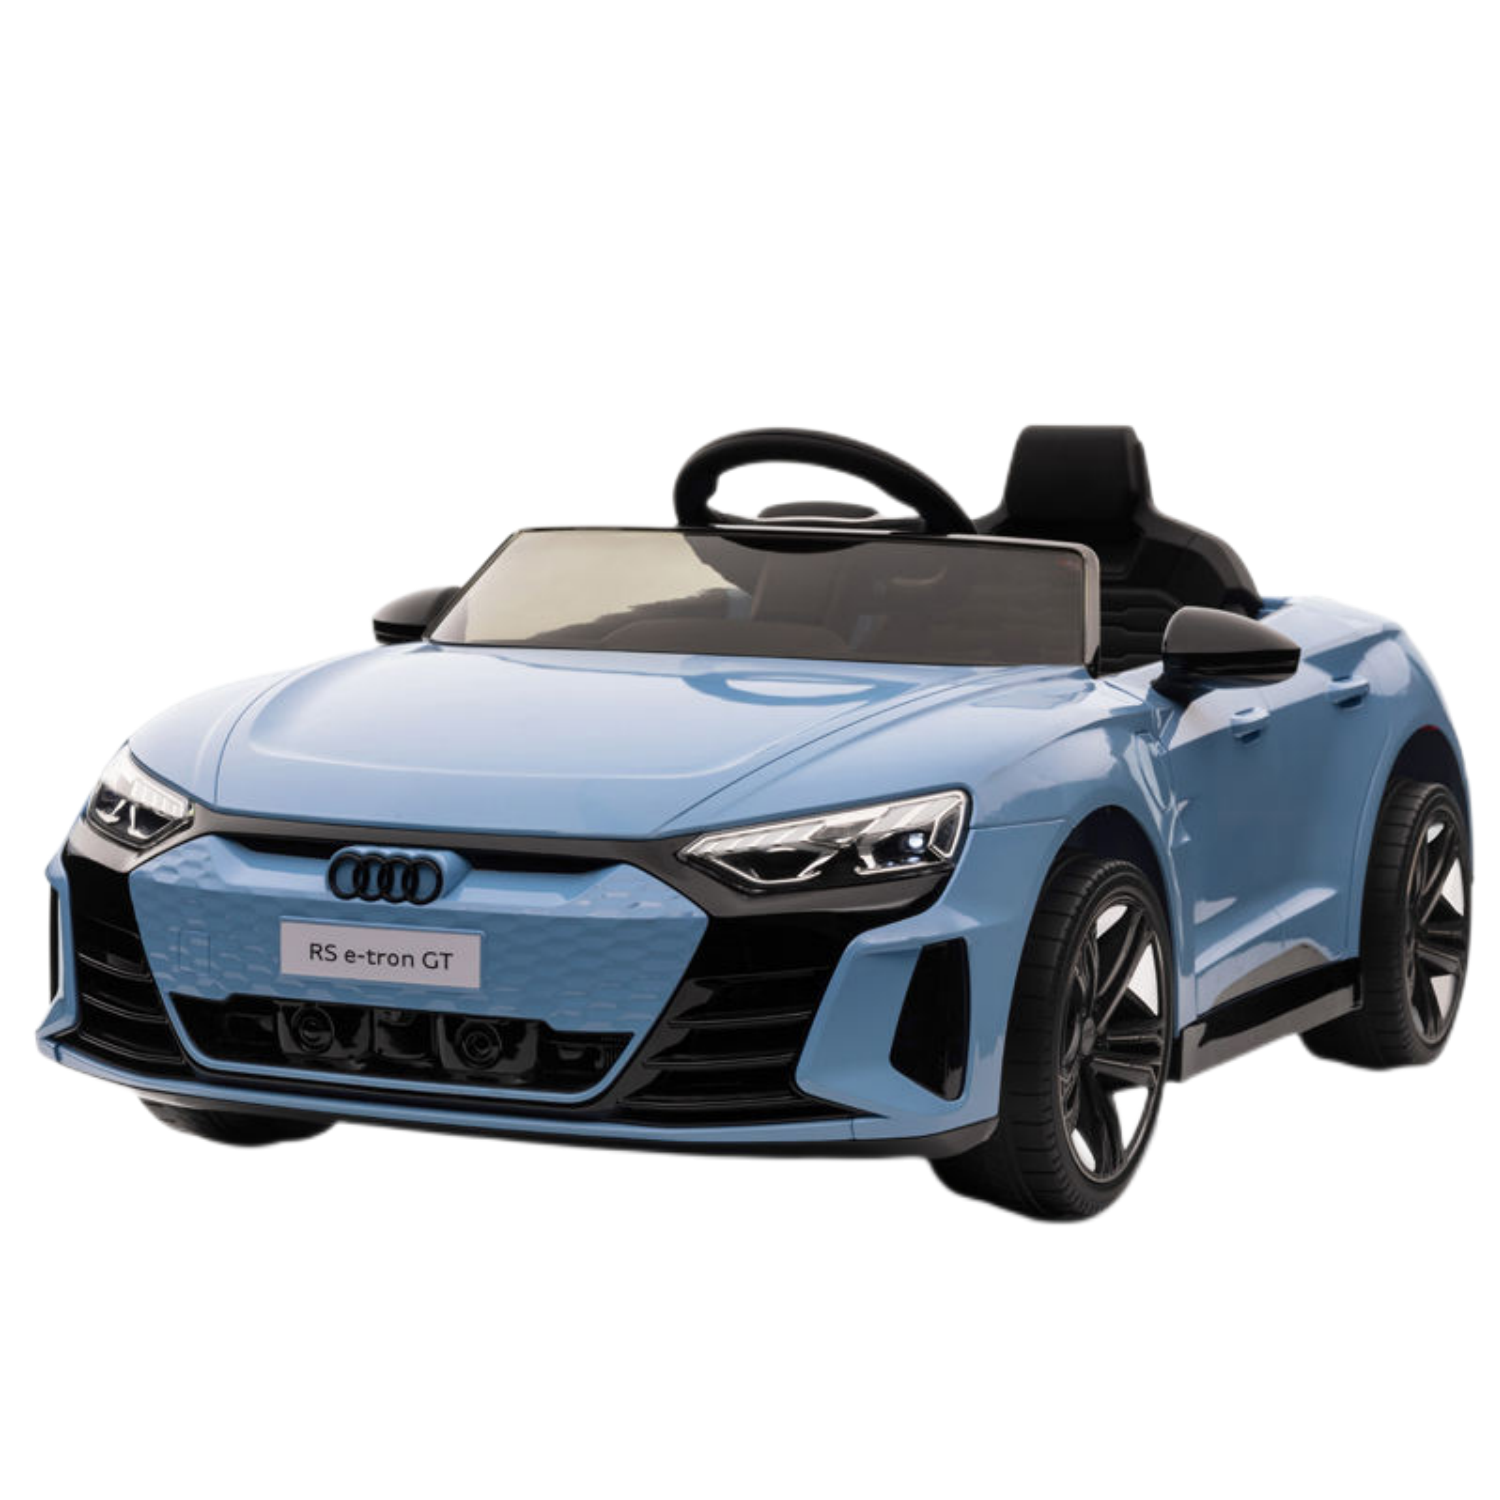 Low Price Licensed Audi RS Etron GT Electric Car For Children Music Light Power Battery Kid Toy Remote Control Ride On Car